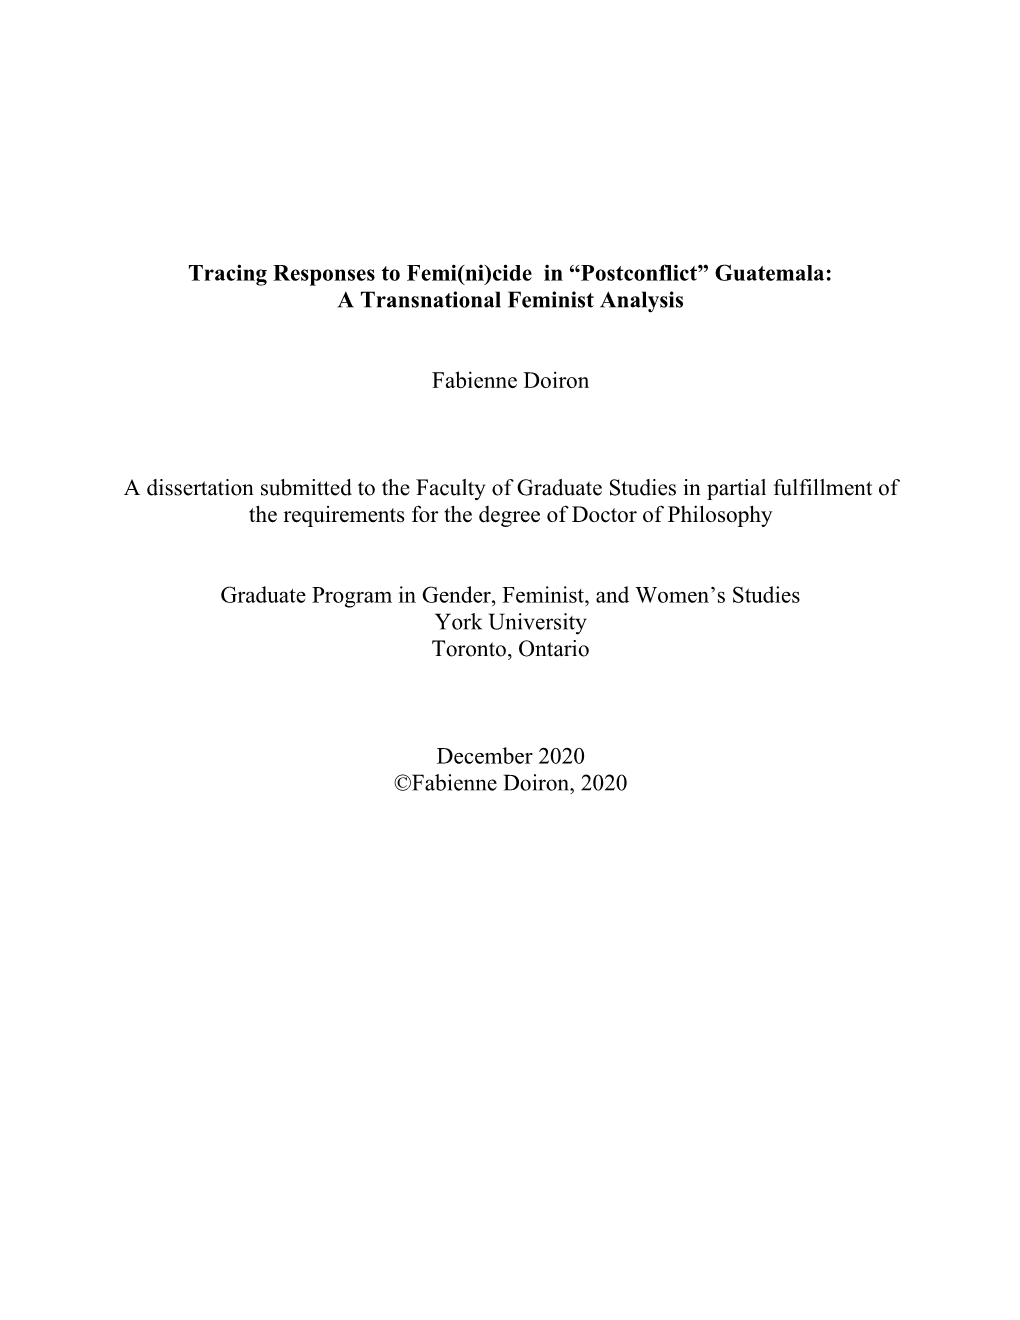 Tracing Responses to Femi(Ni)Cide in “Postconflict” Guatemala: a Transnational Feminist Analysis